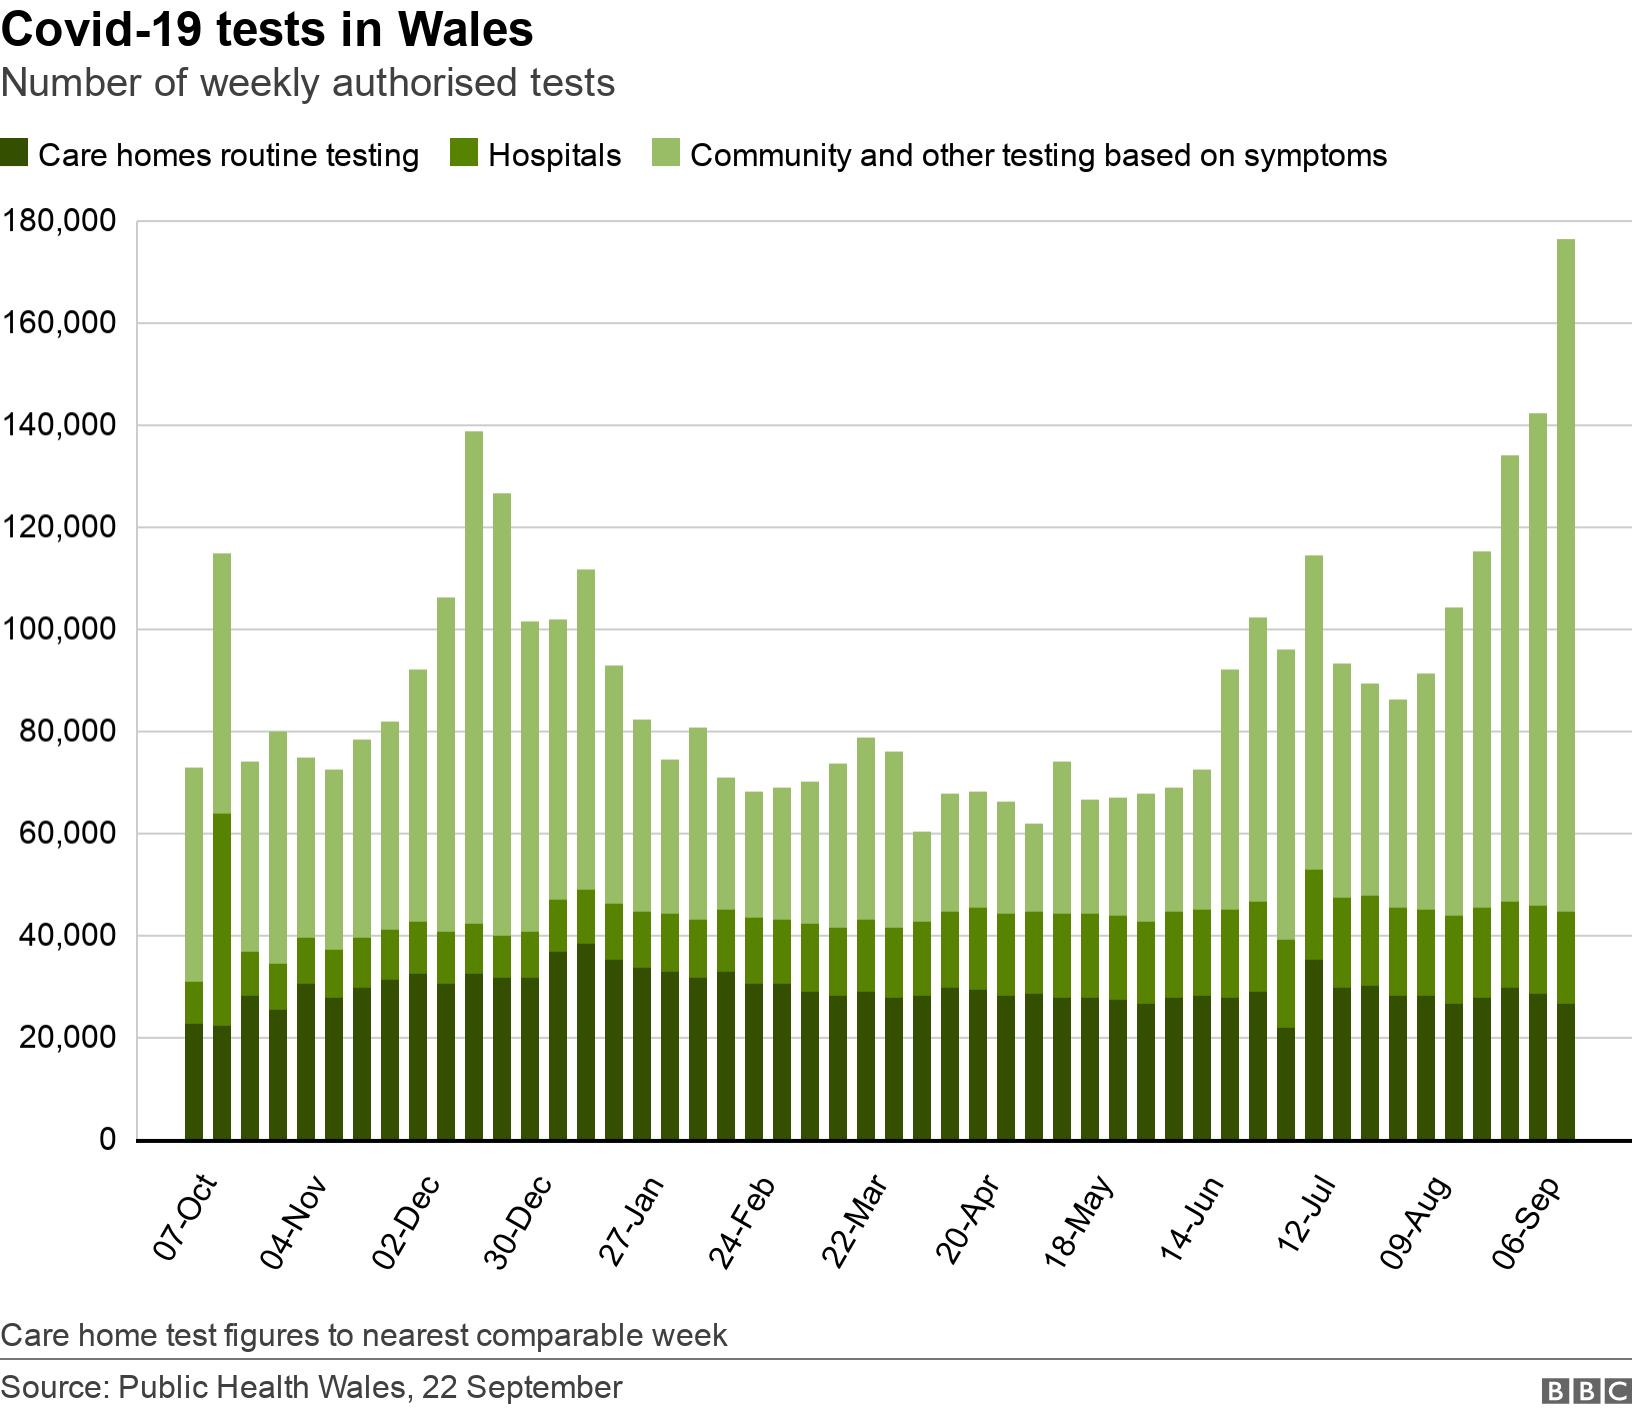 Covid-19 tests in Wales. Number of weekly authorised tests.  Care home test figures to nearest comparable week.